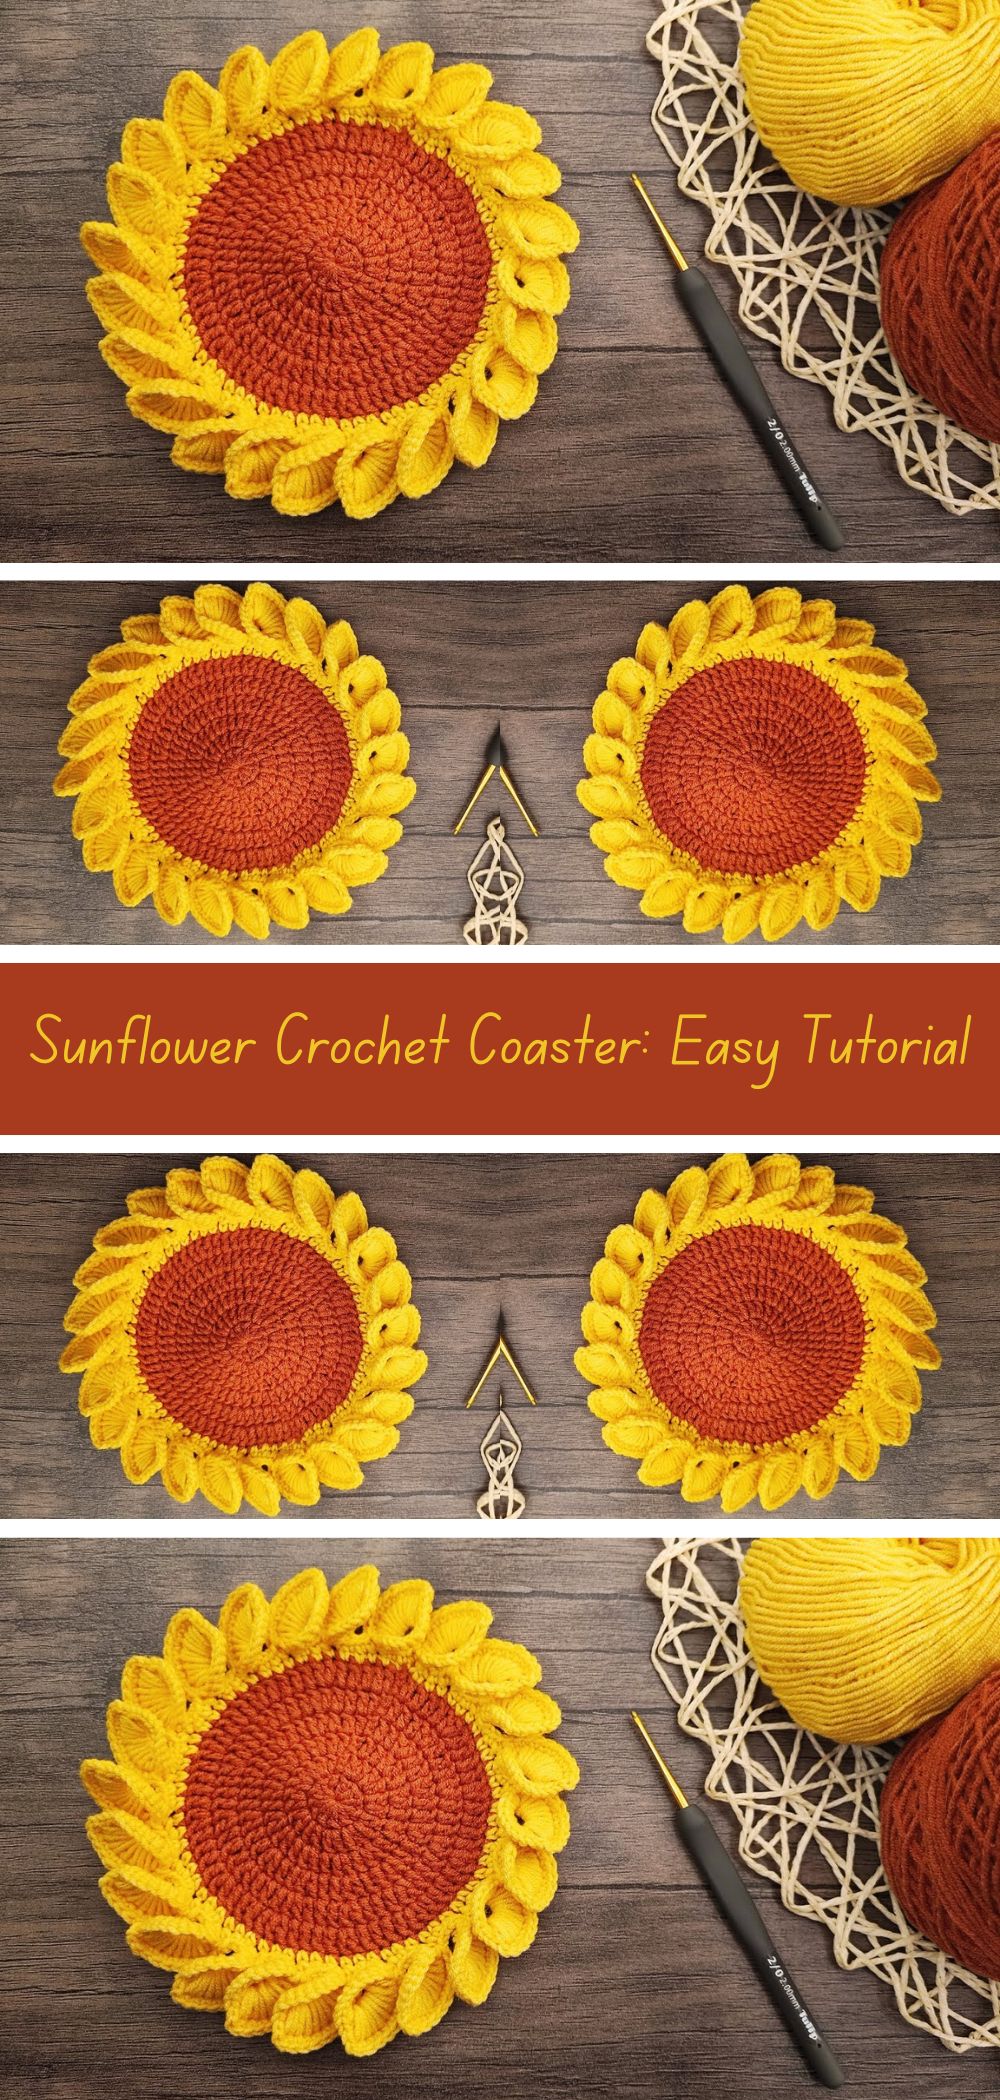 Easy Crochet Sunflower Coaster Pattern - Bright and cheerful coasters to add a touch of sunshine to your home decor